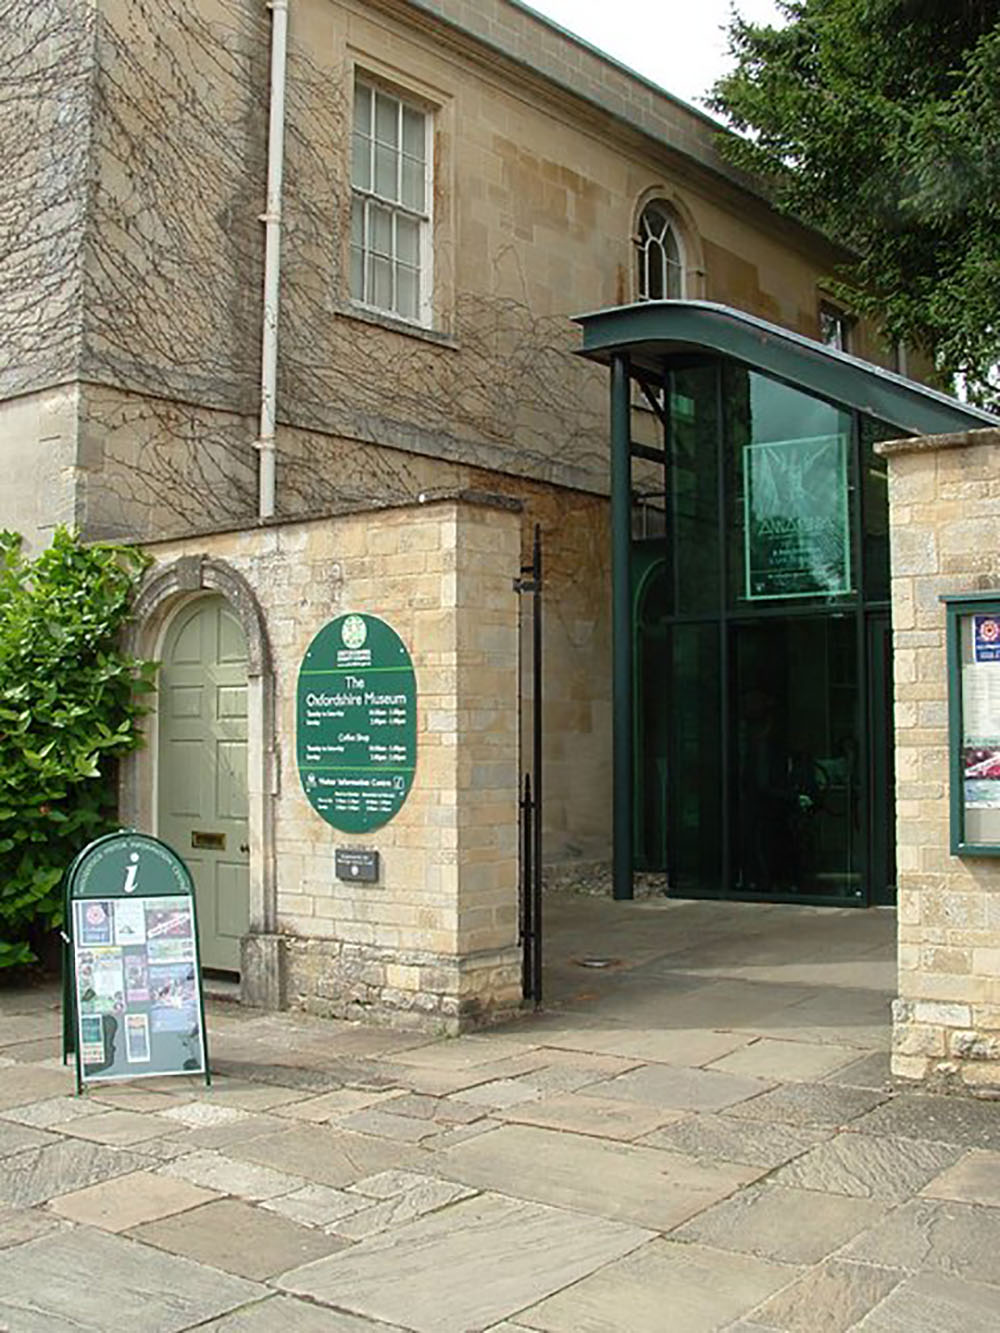 Soldiers of Oxfordshire Museum #1